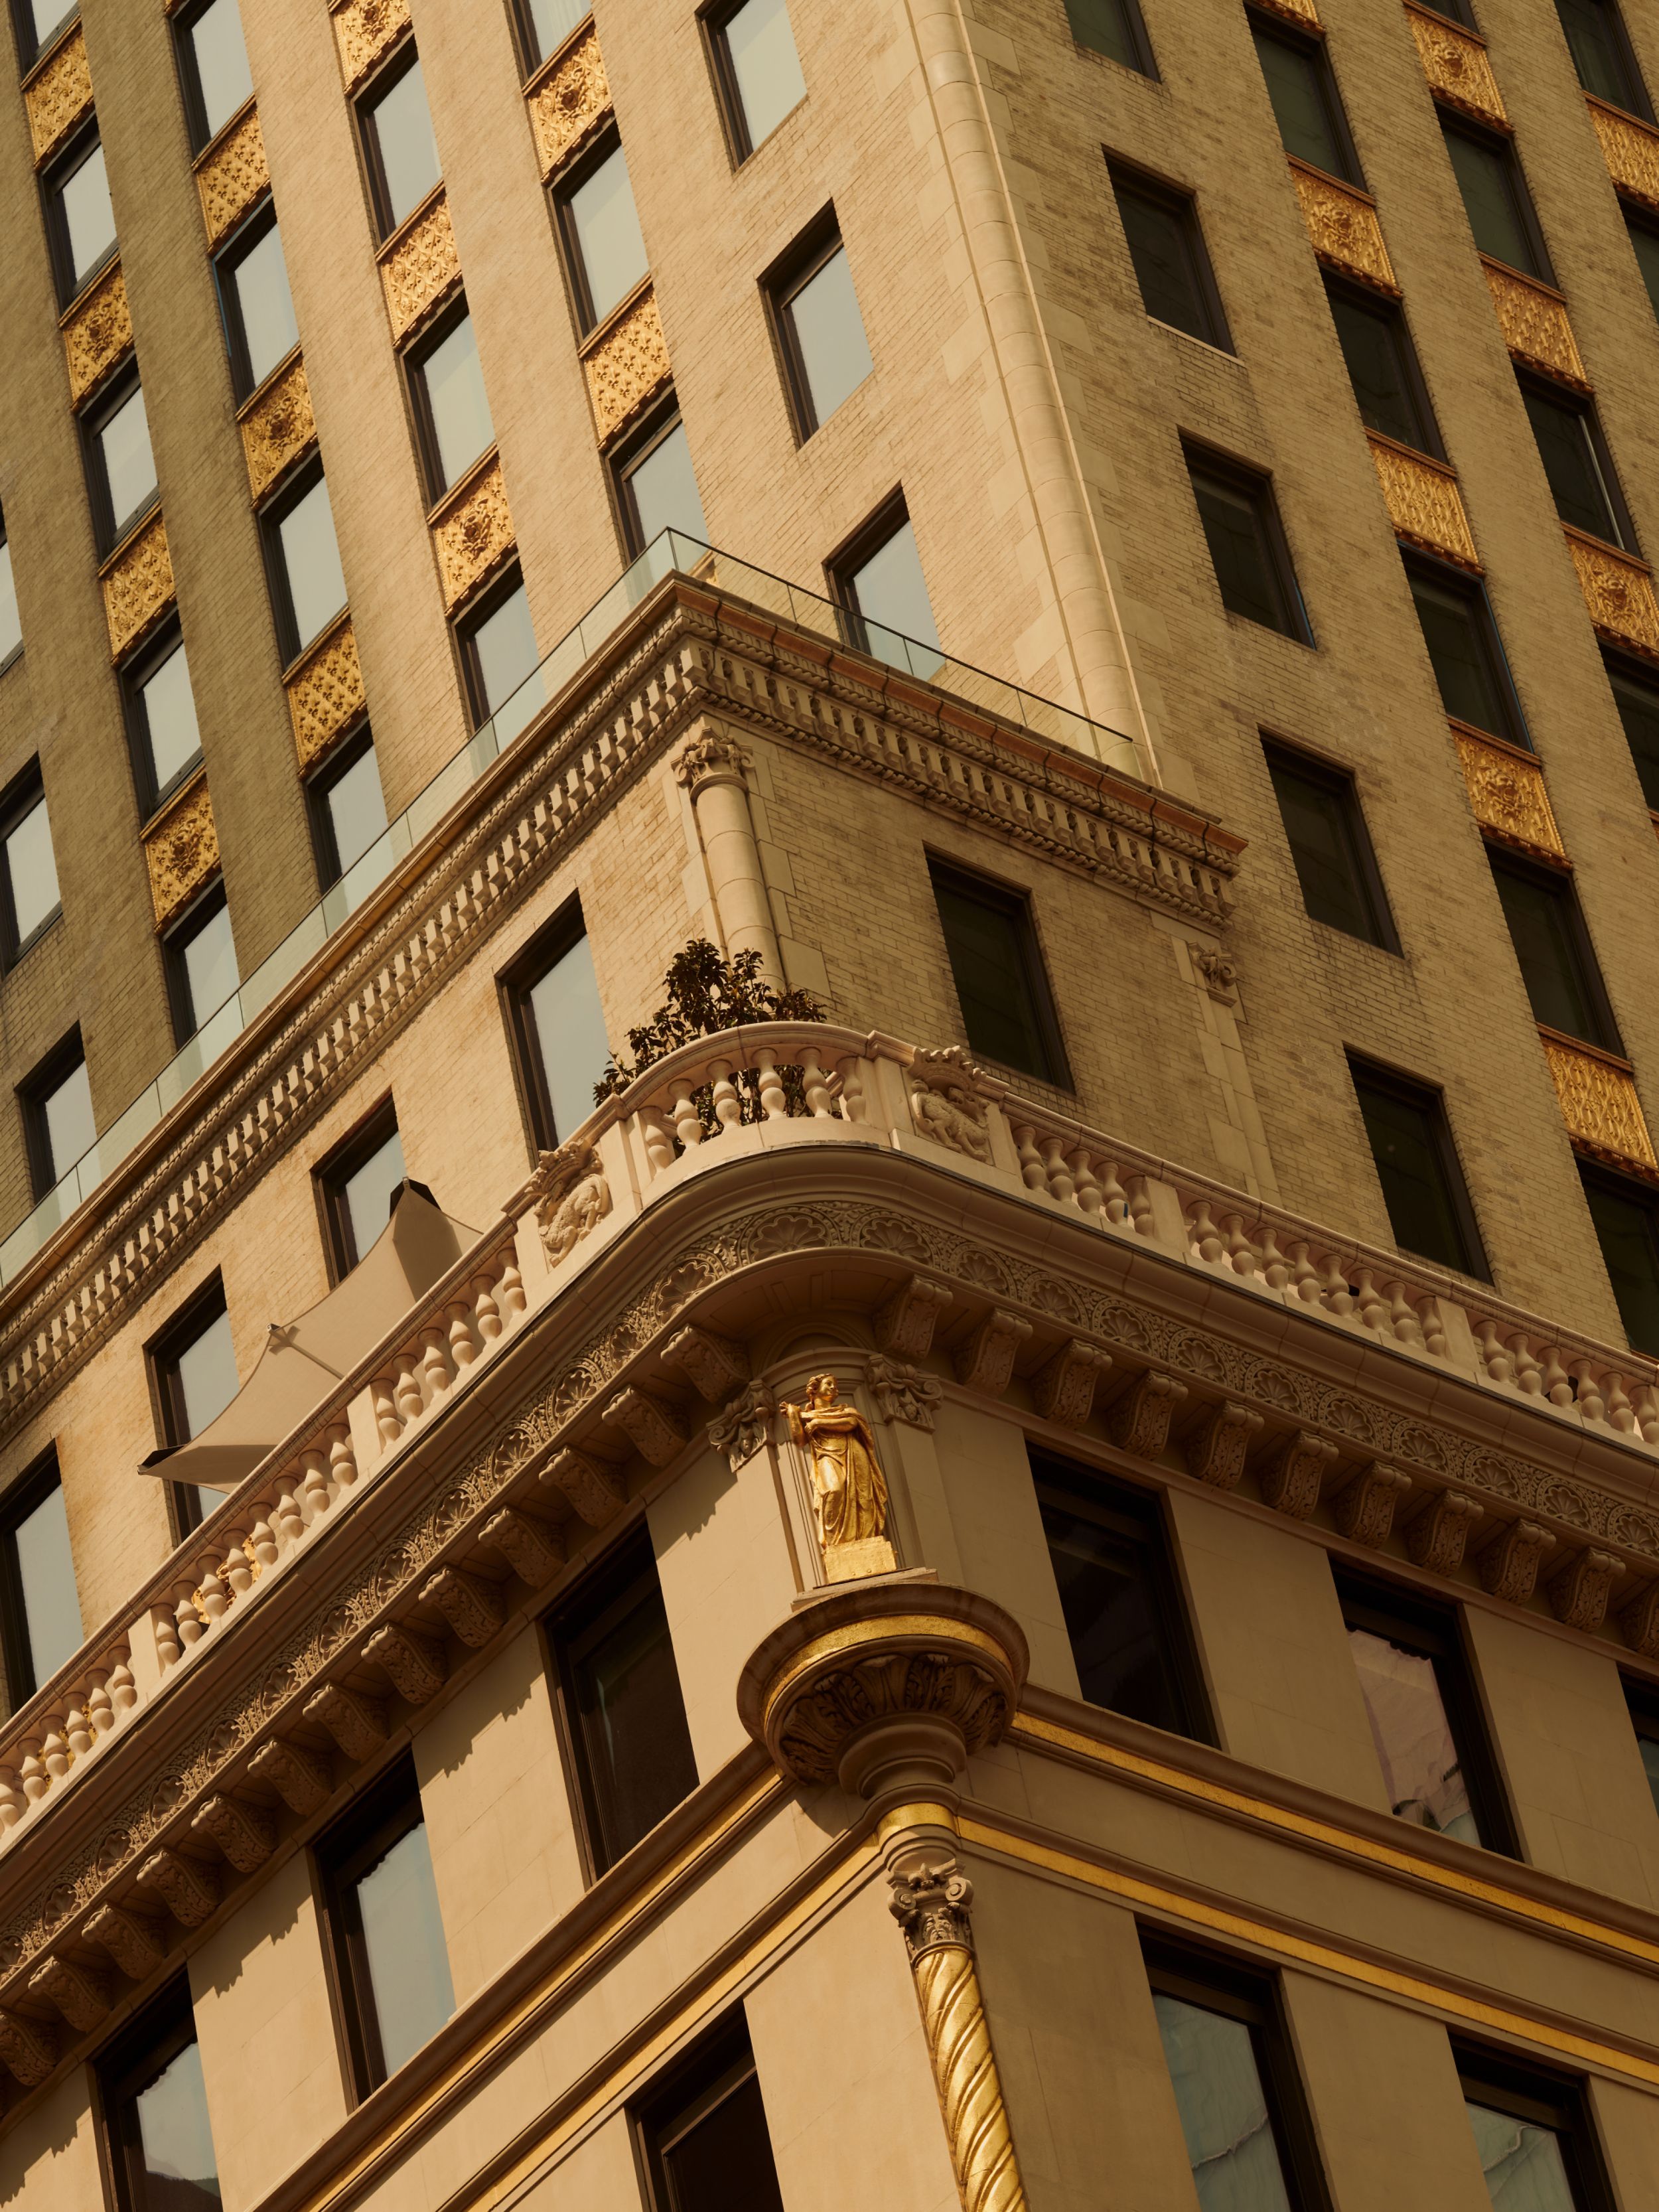 The proud and golden exterior of the Crown Building, restored to house Aman New York. Photographed by Robert Rieger.